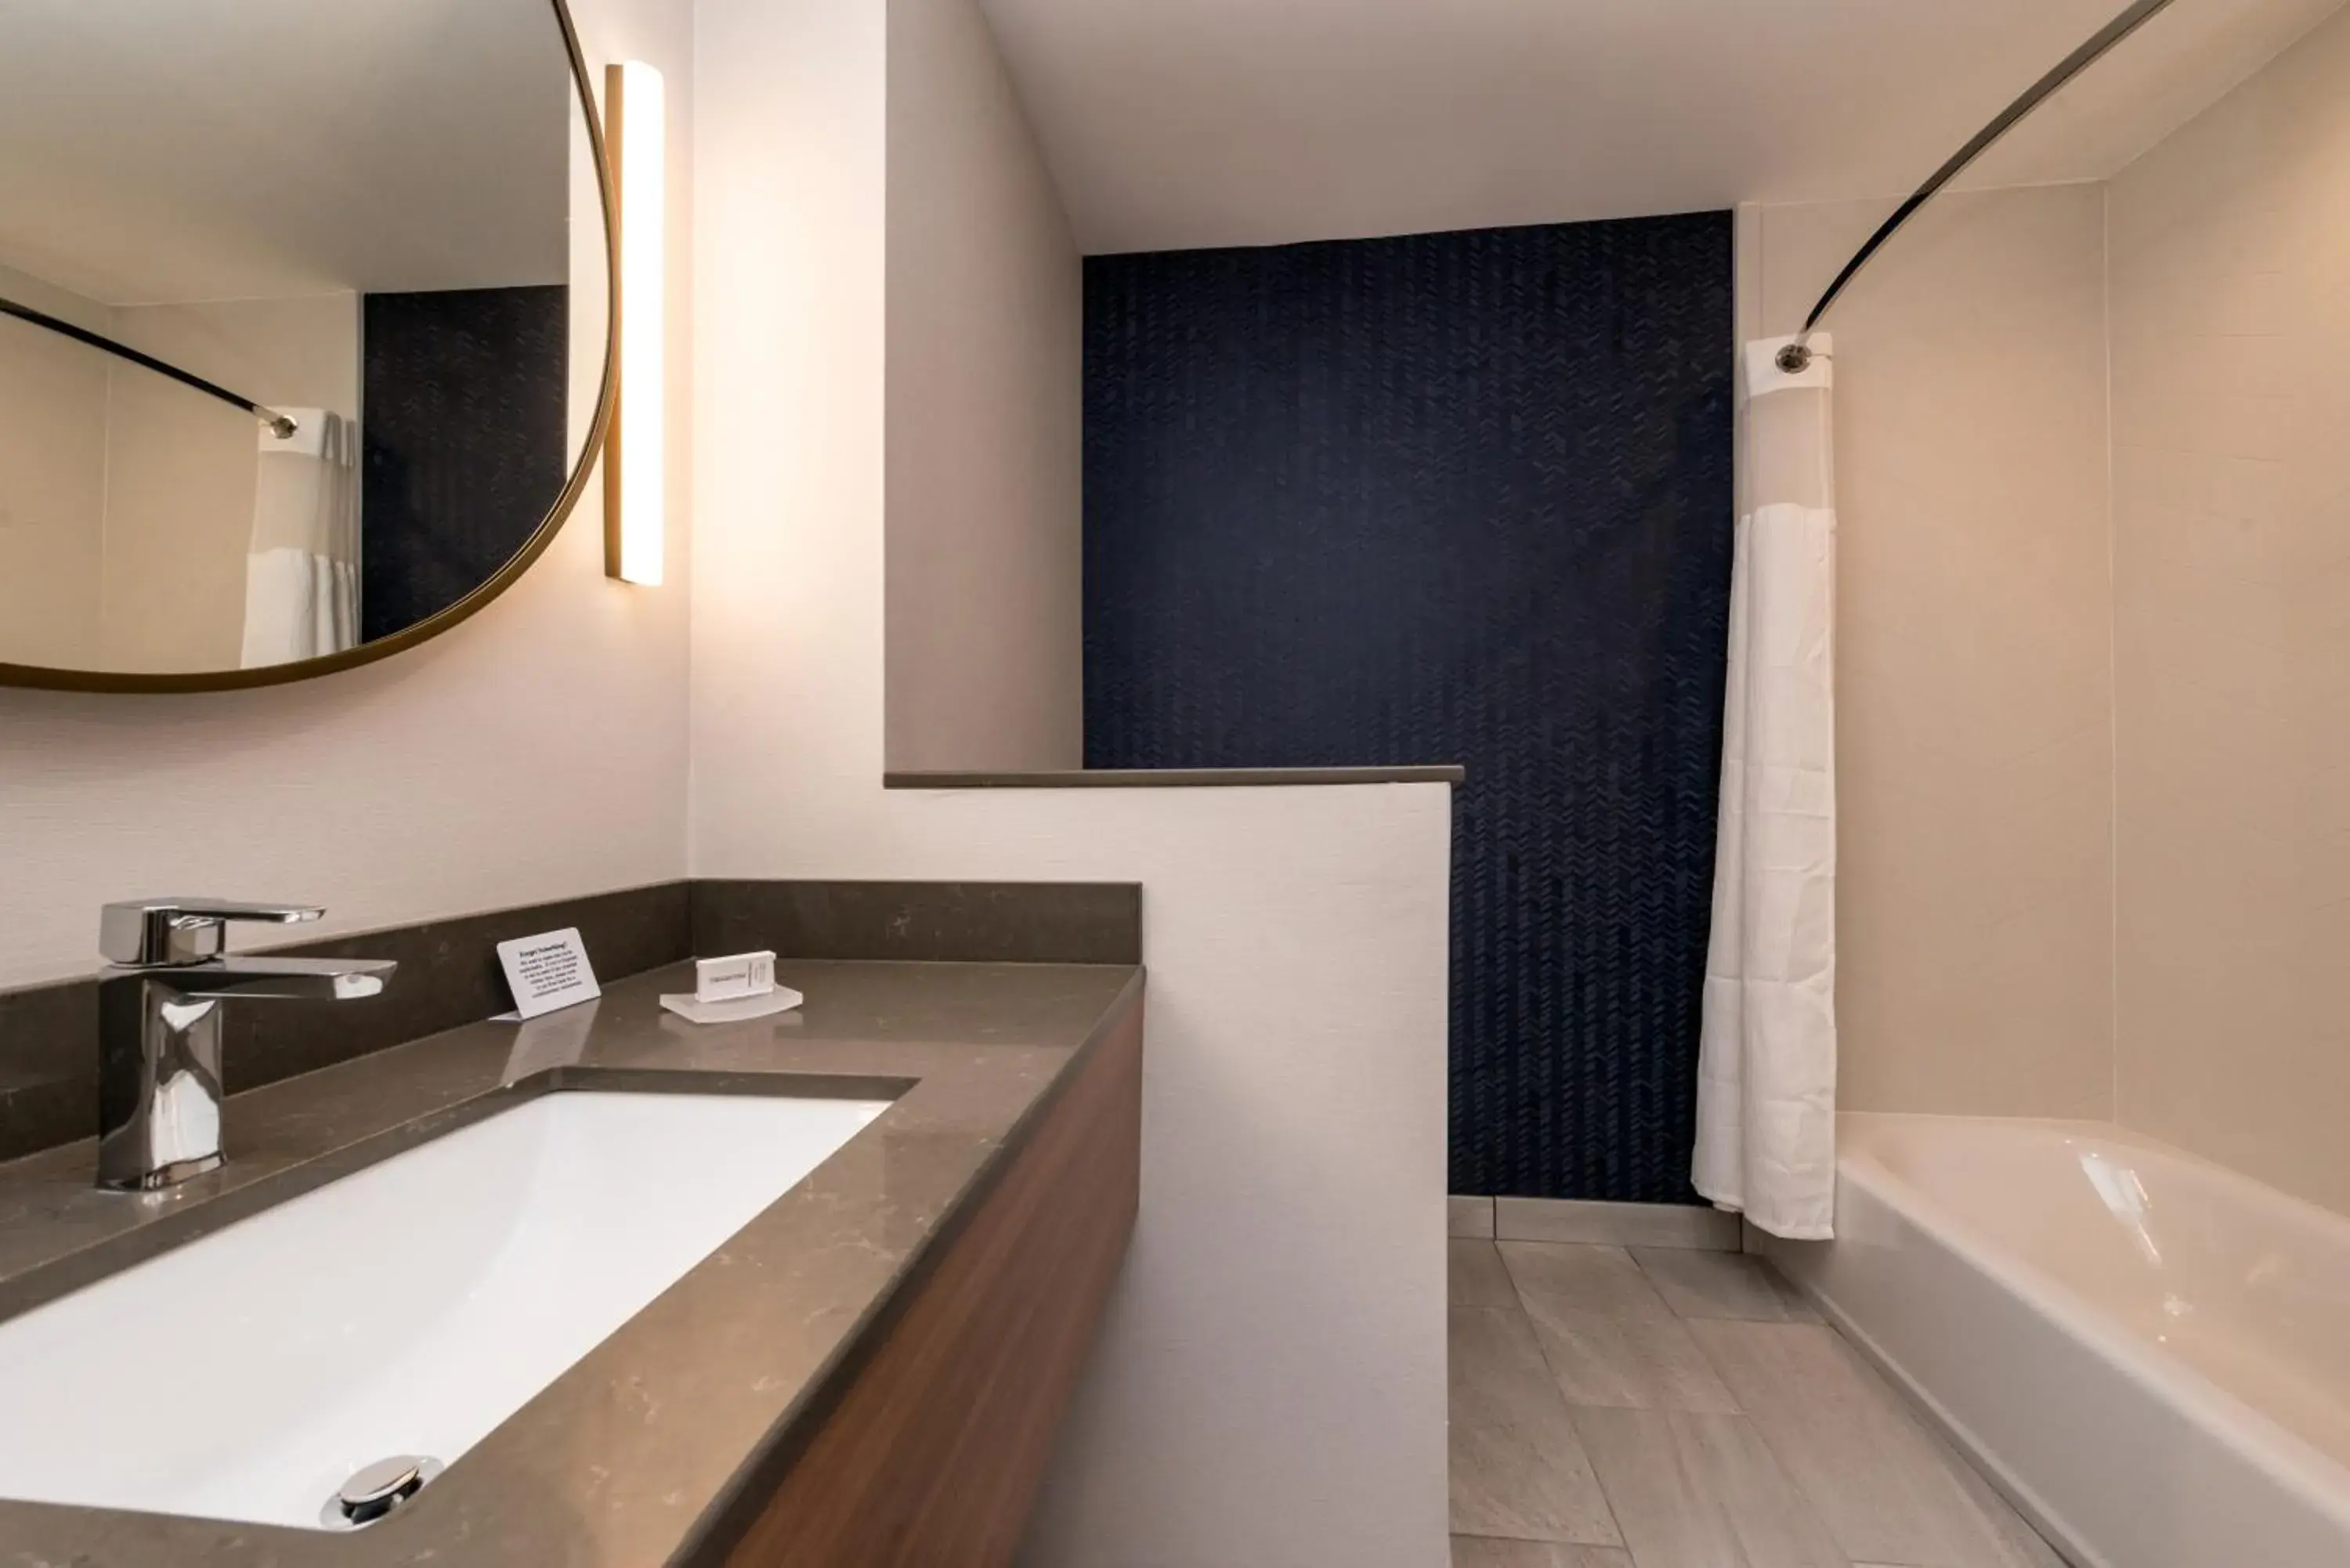 Bathroom in Fairfield Inn & Suites by Marriott Fort Worth Southwest at Cityview